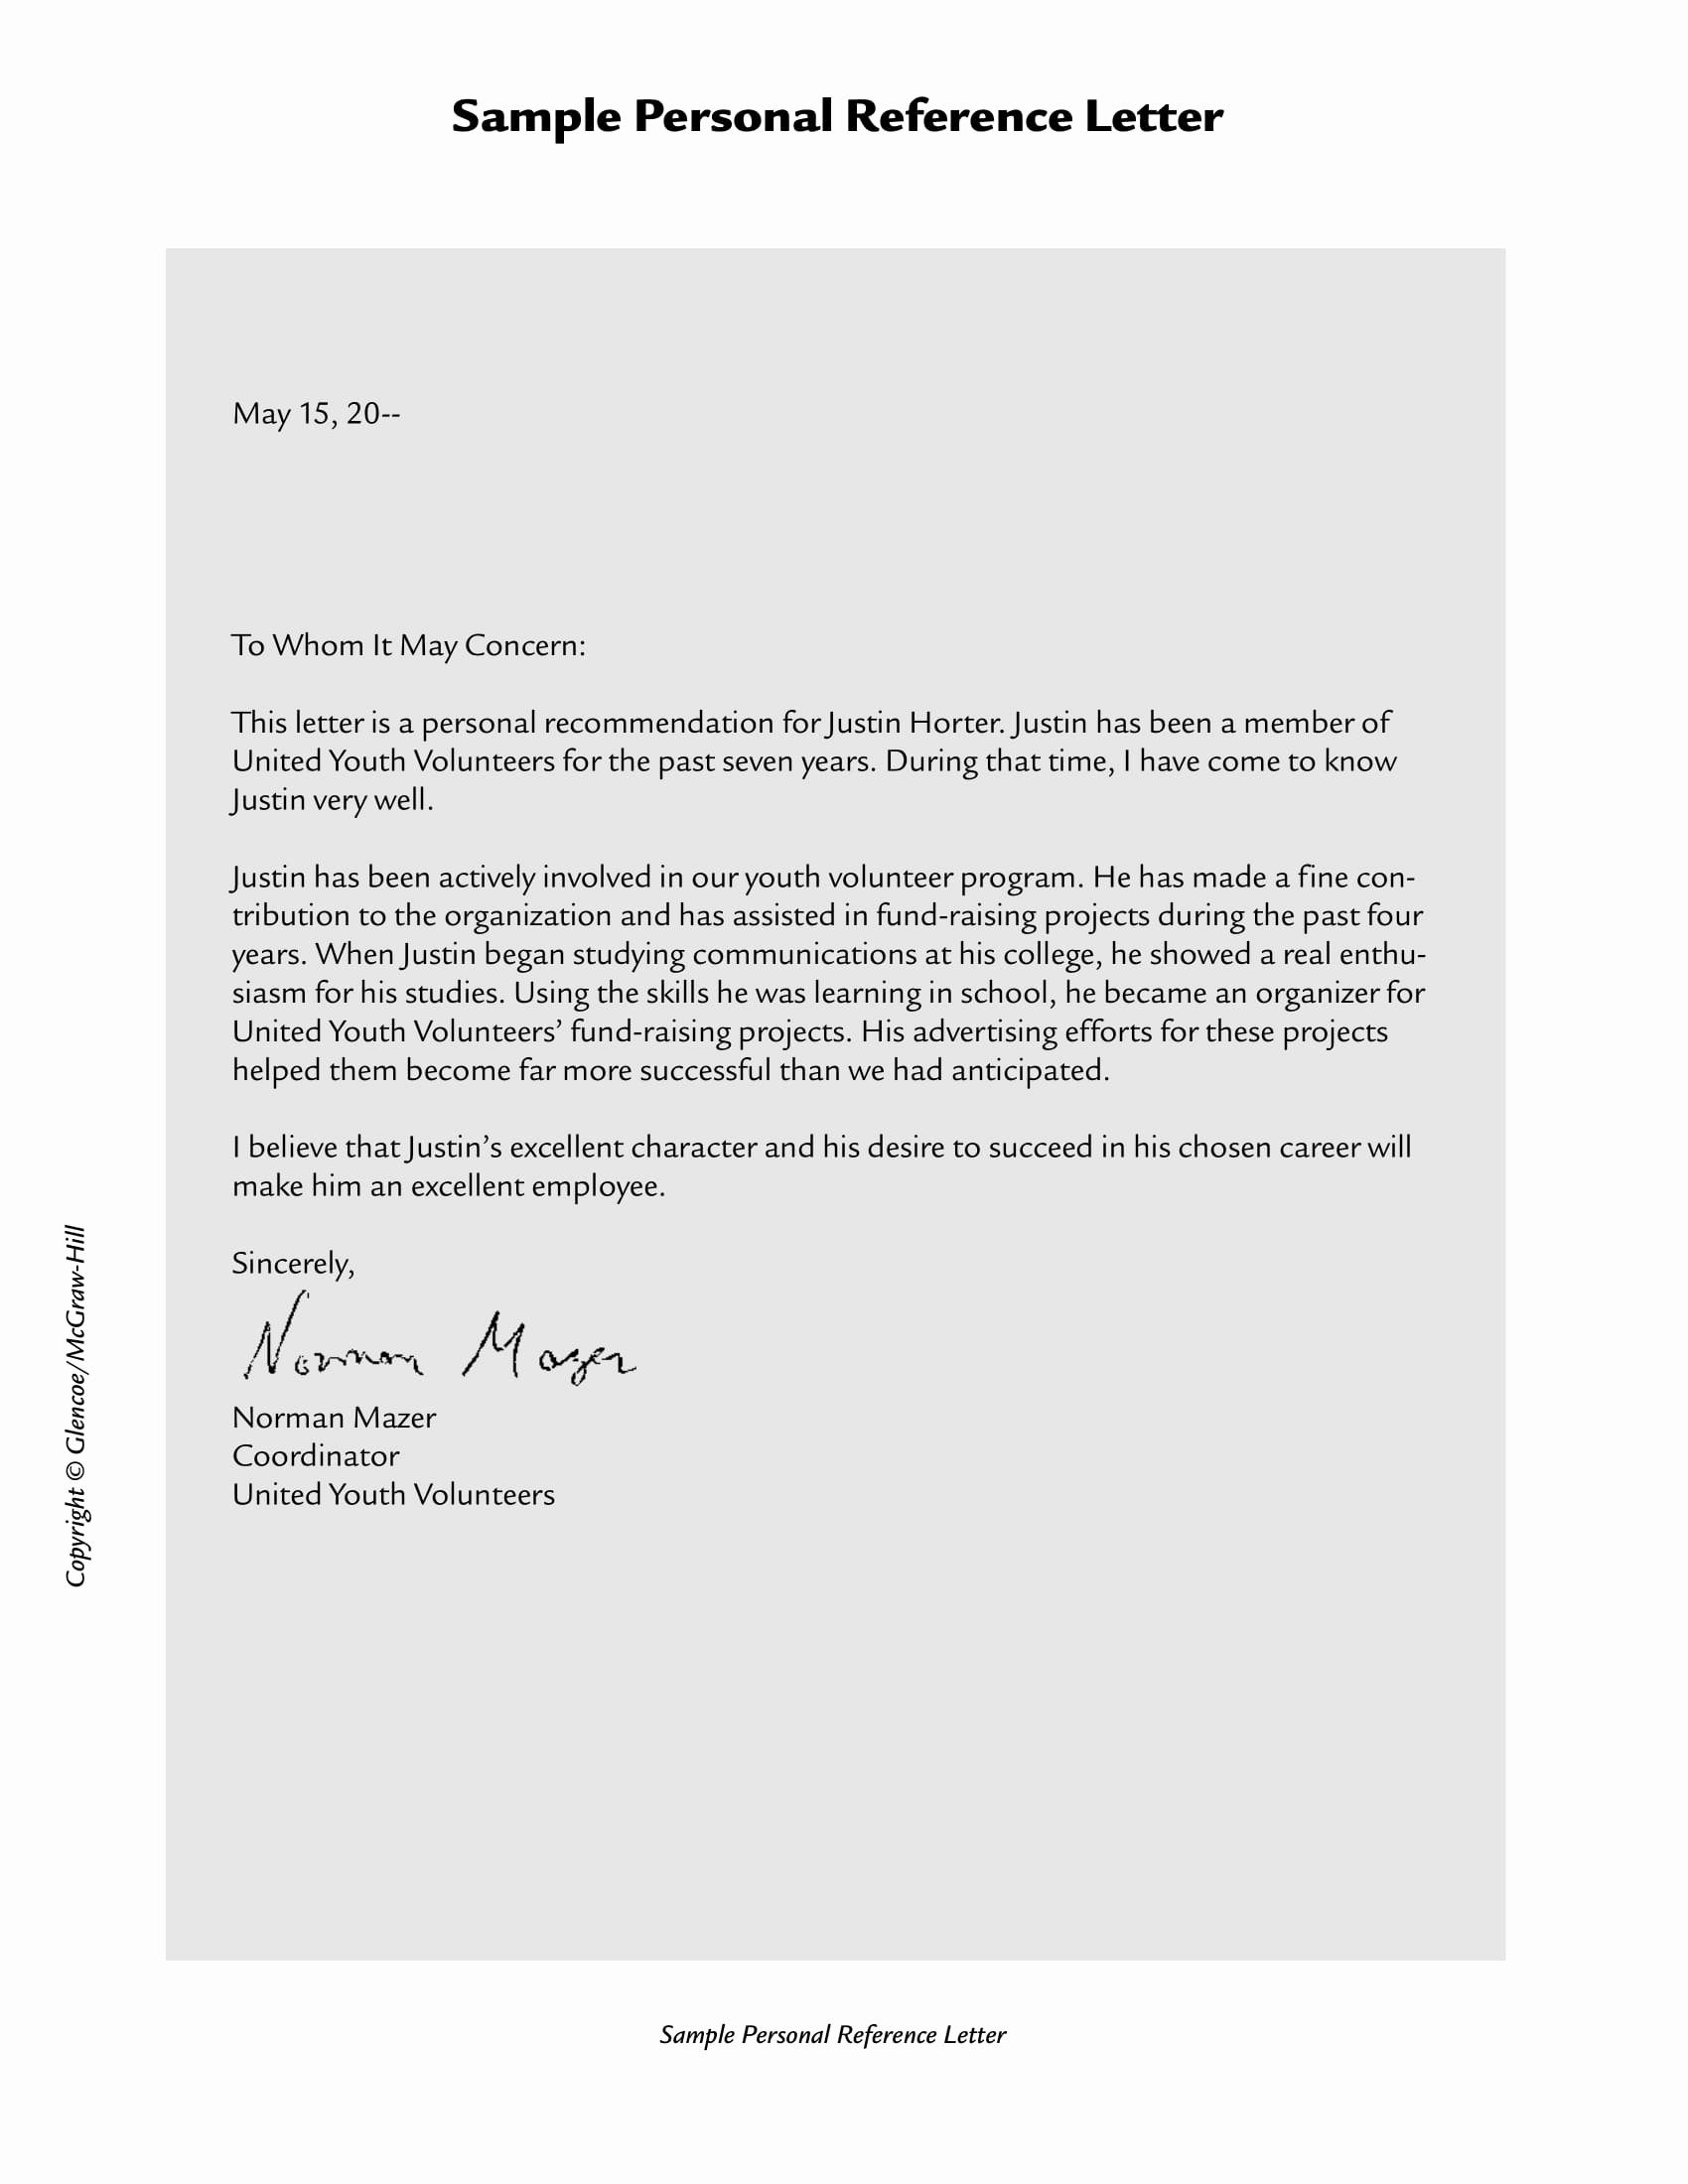 Personal Recommendation Letter Sample New 10 Personal Re Mendation Letter Examples Pdf Word